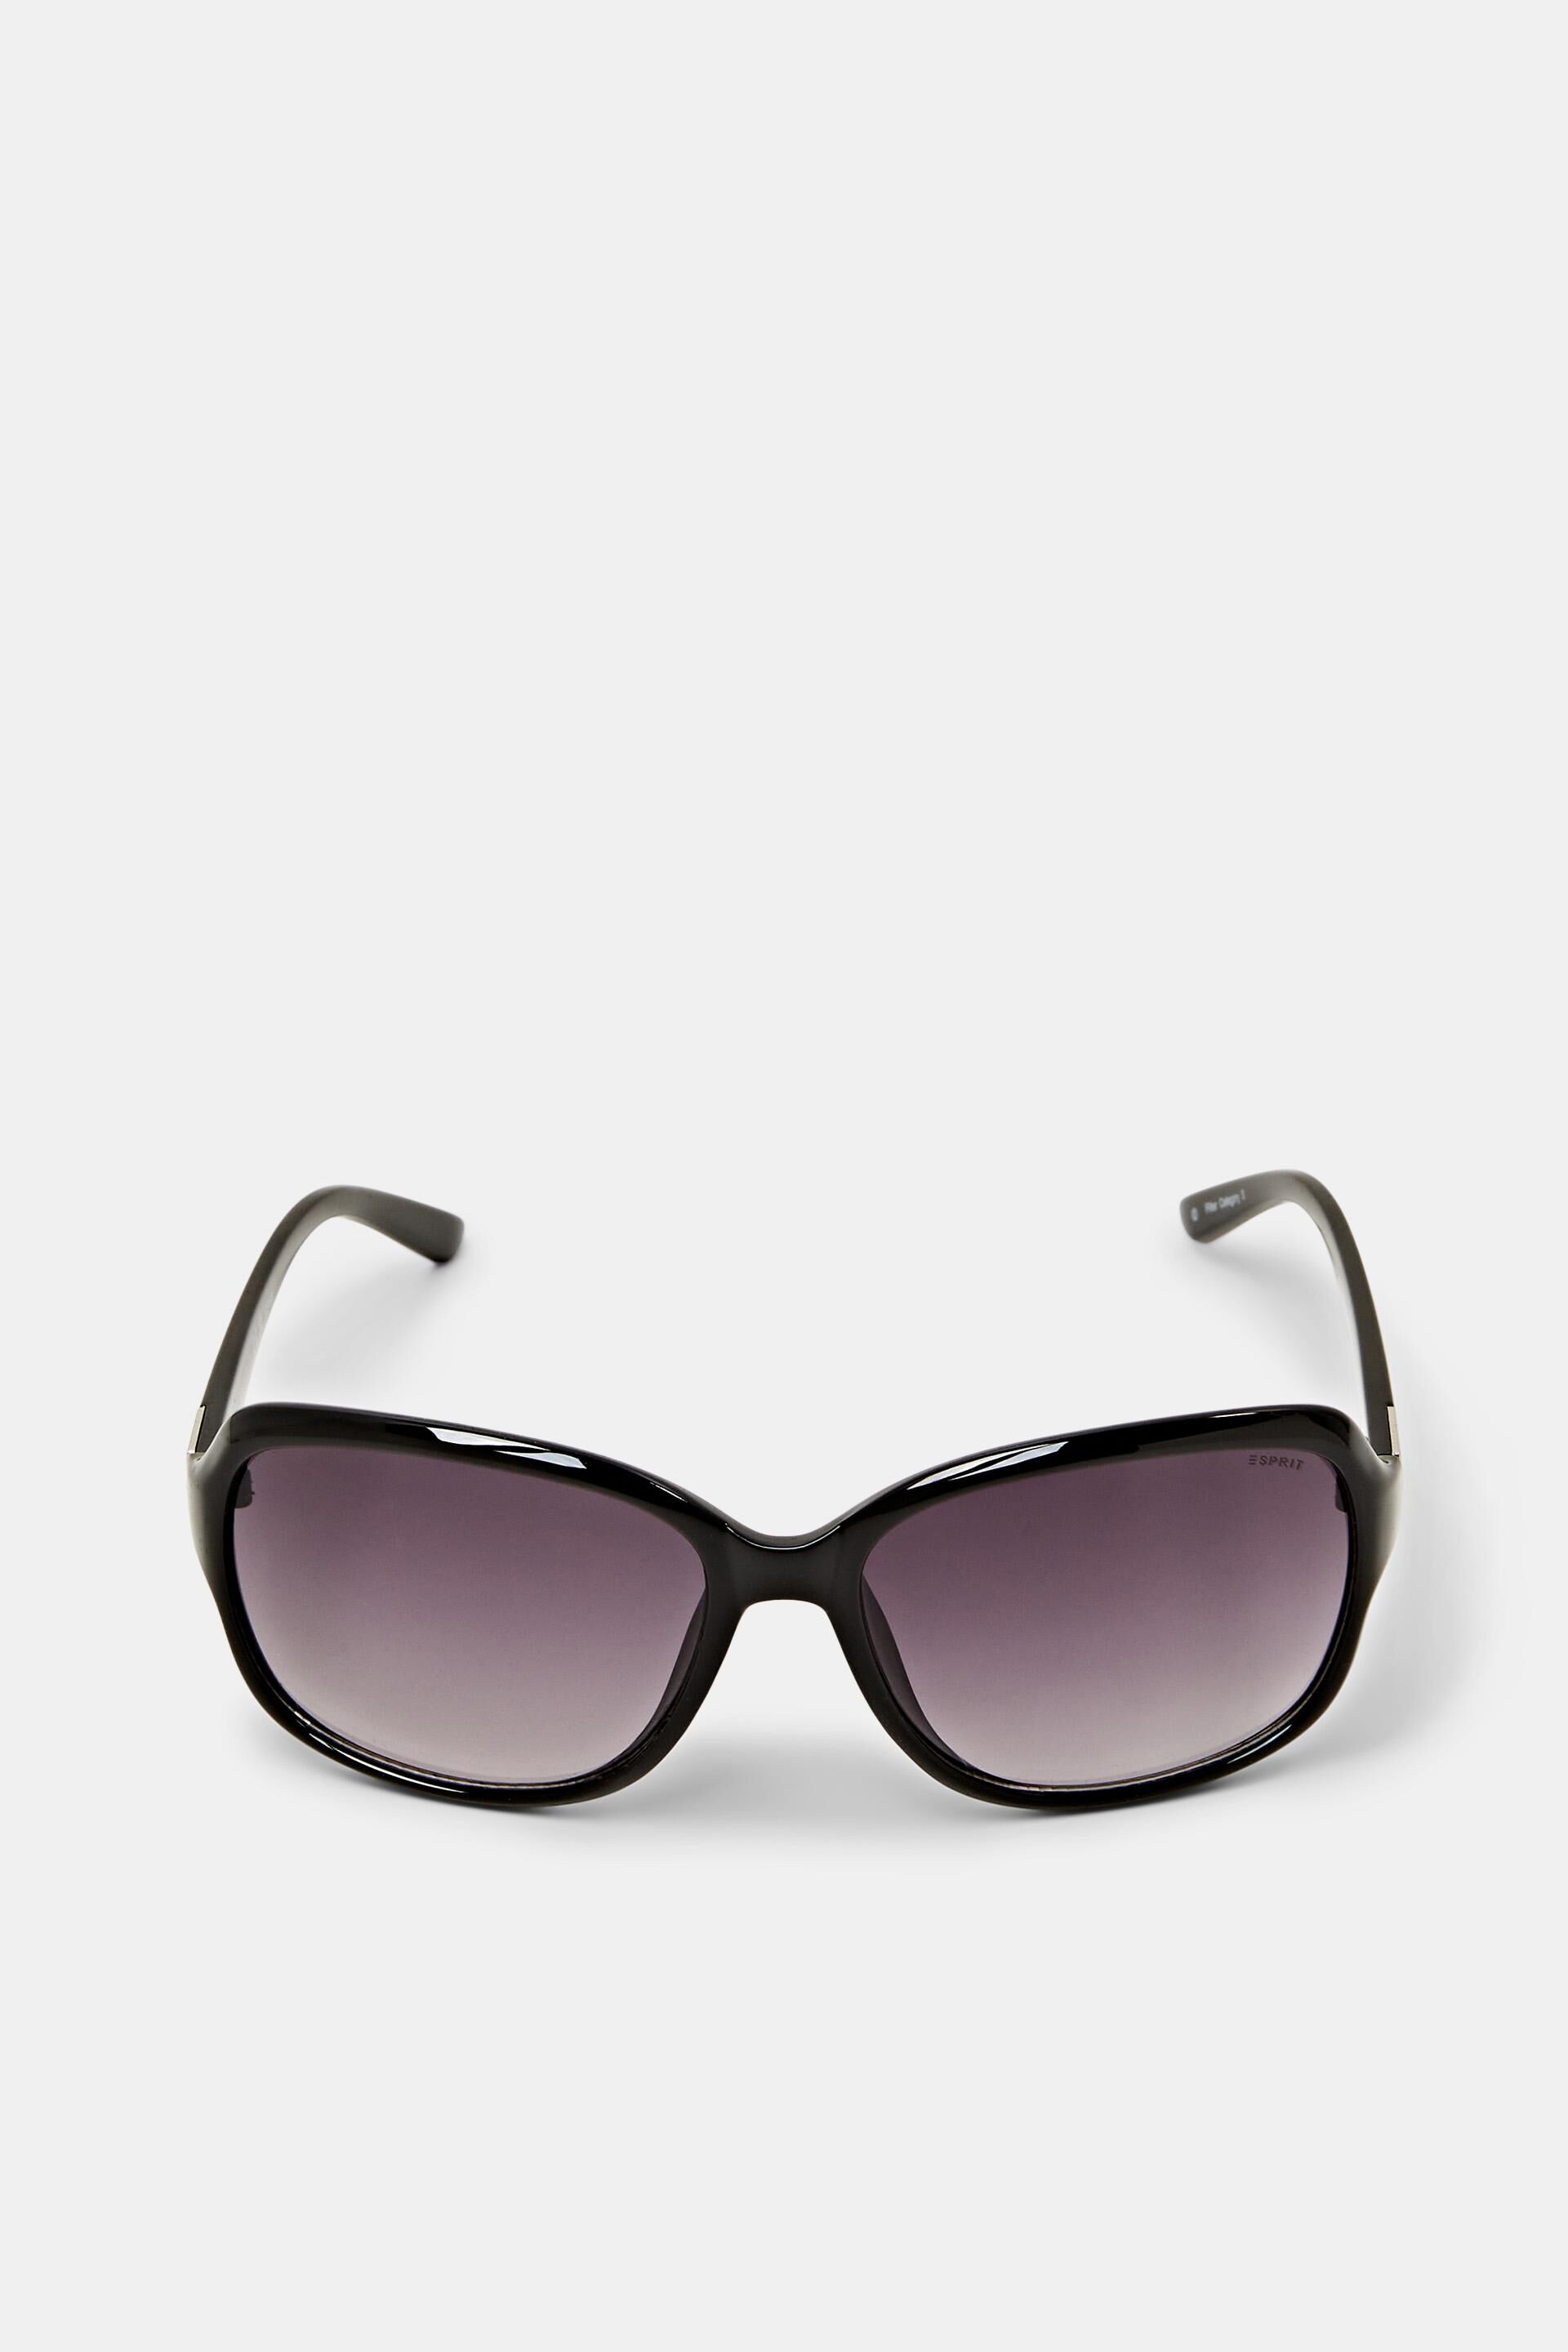 Esprit Online Store Sunglasses with a timeless design